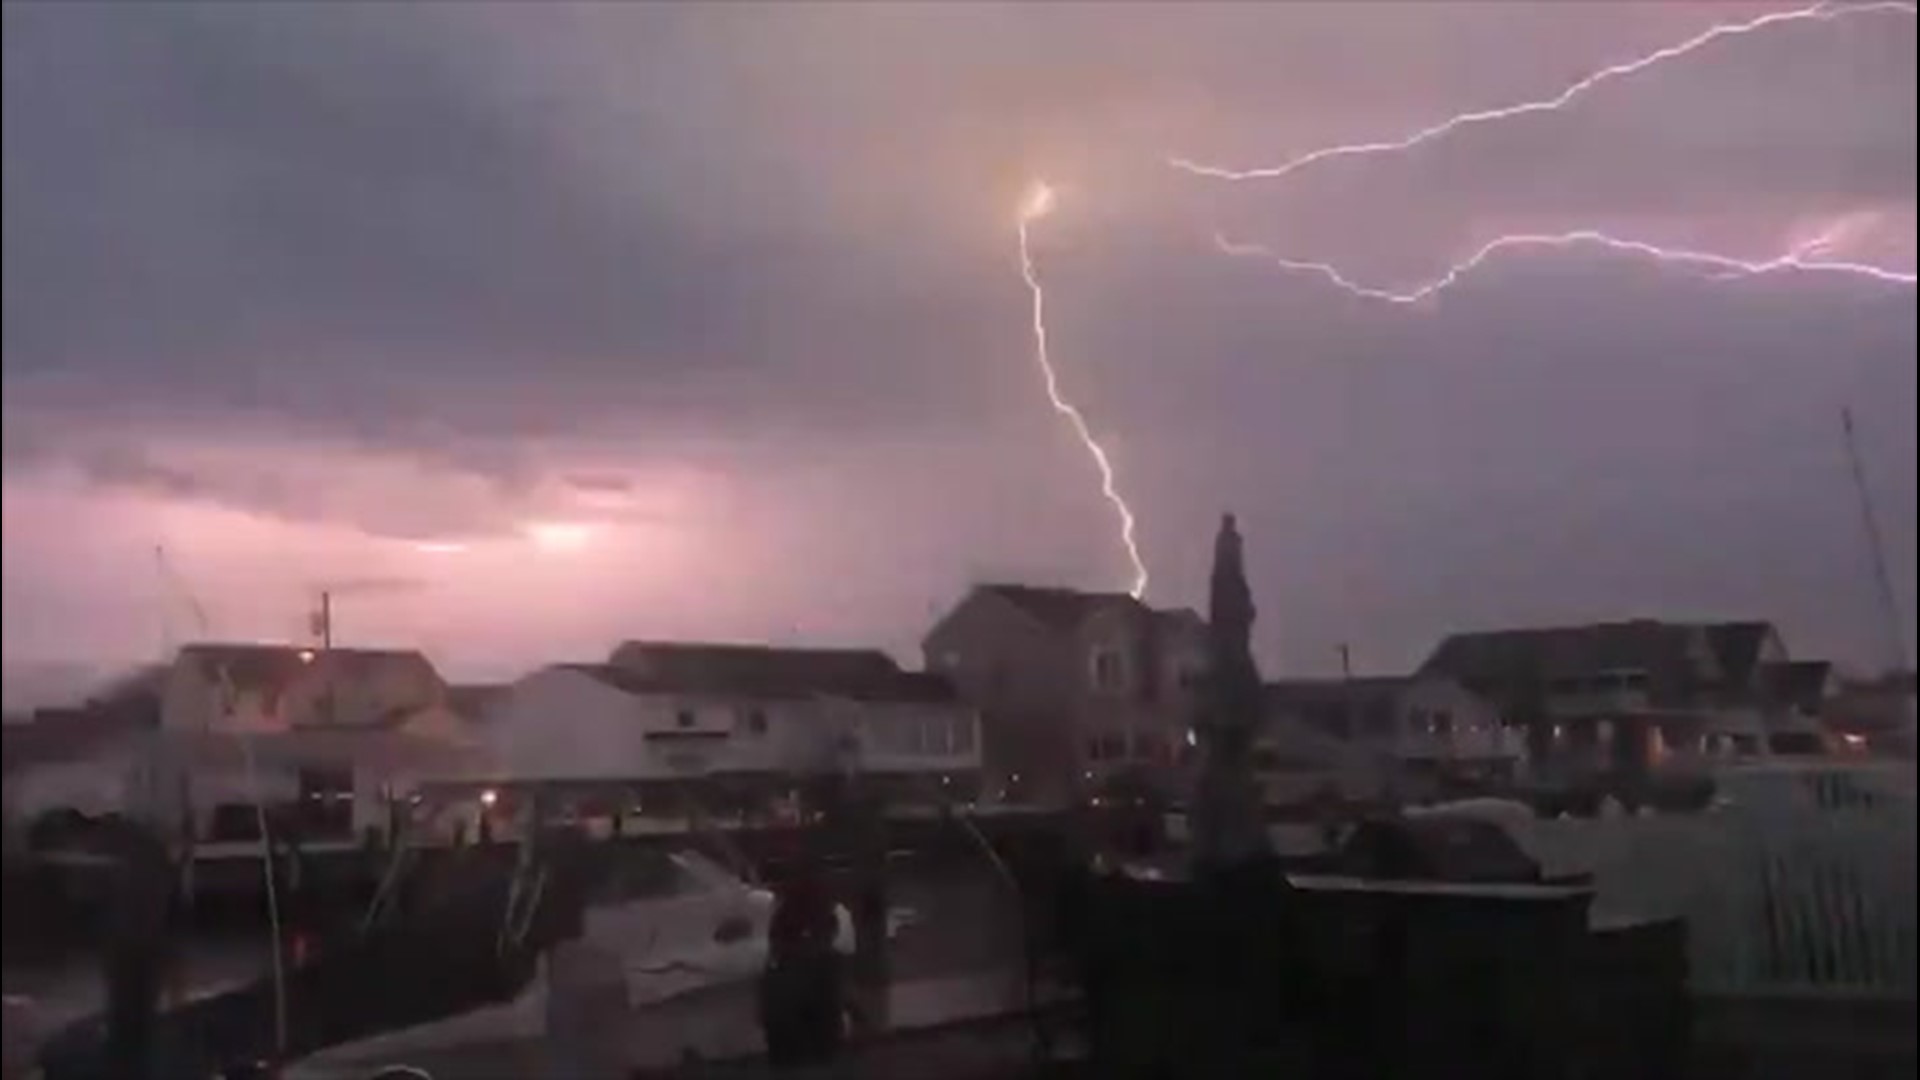 A massive bolt of lightning was spotted shining against the evening sky of Toms River, New Jersey, on Aug. 7 as a powerful storm raged.